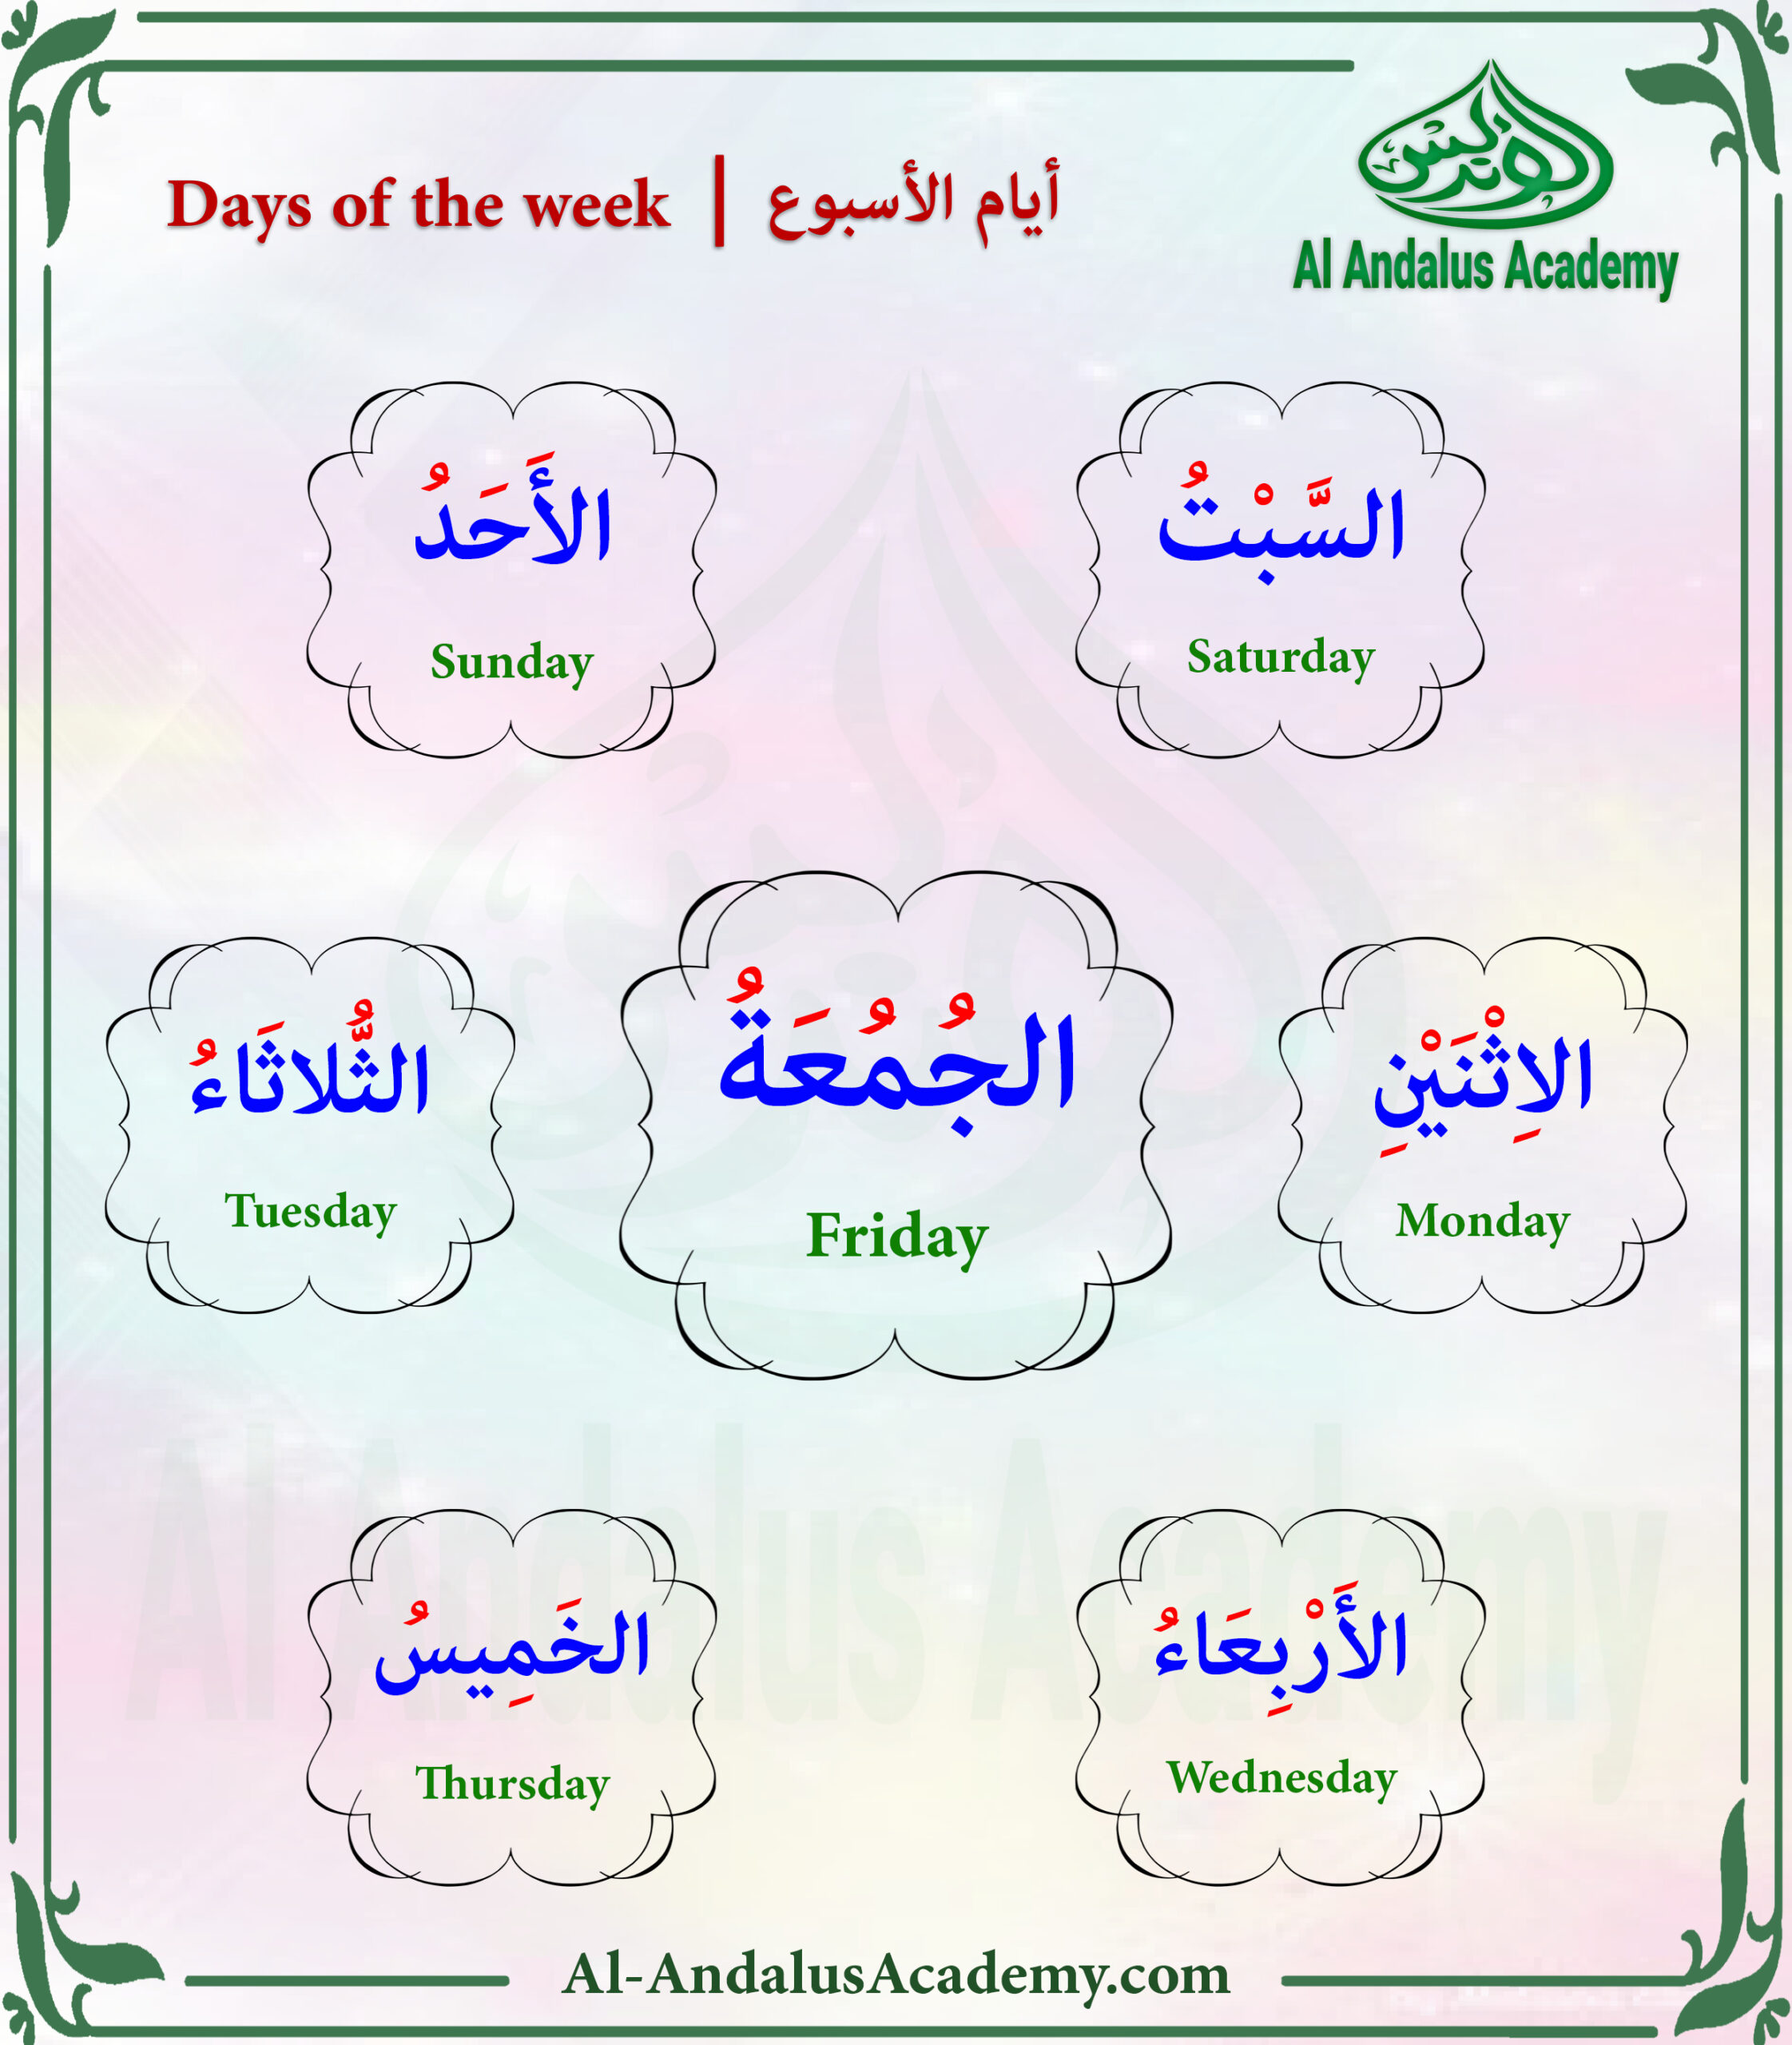 Days of the week scaled